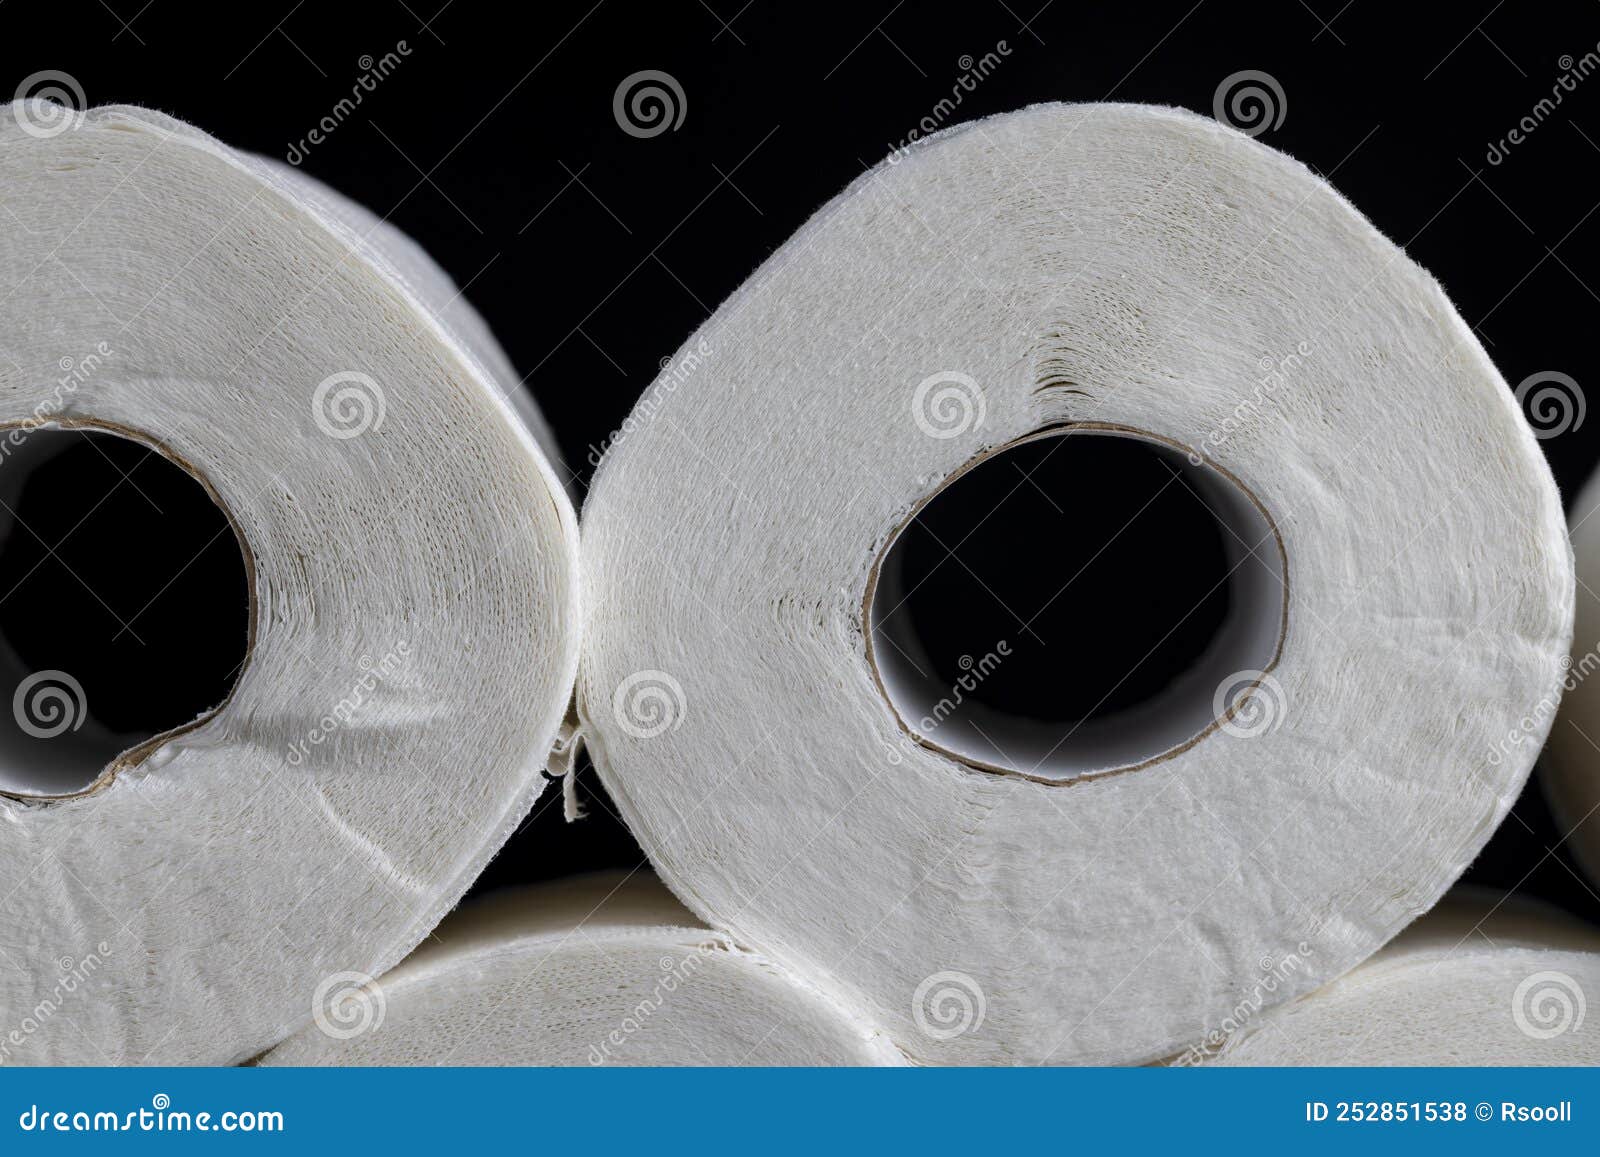 Toilet Paper Made after Recycling Used Paper and Cardboard Stock Photo ...